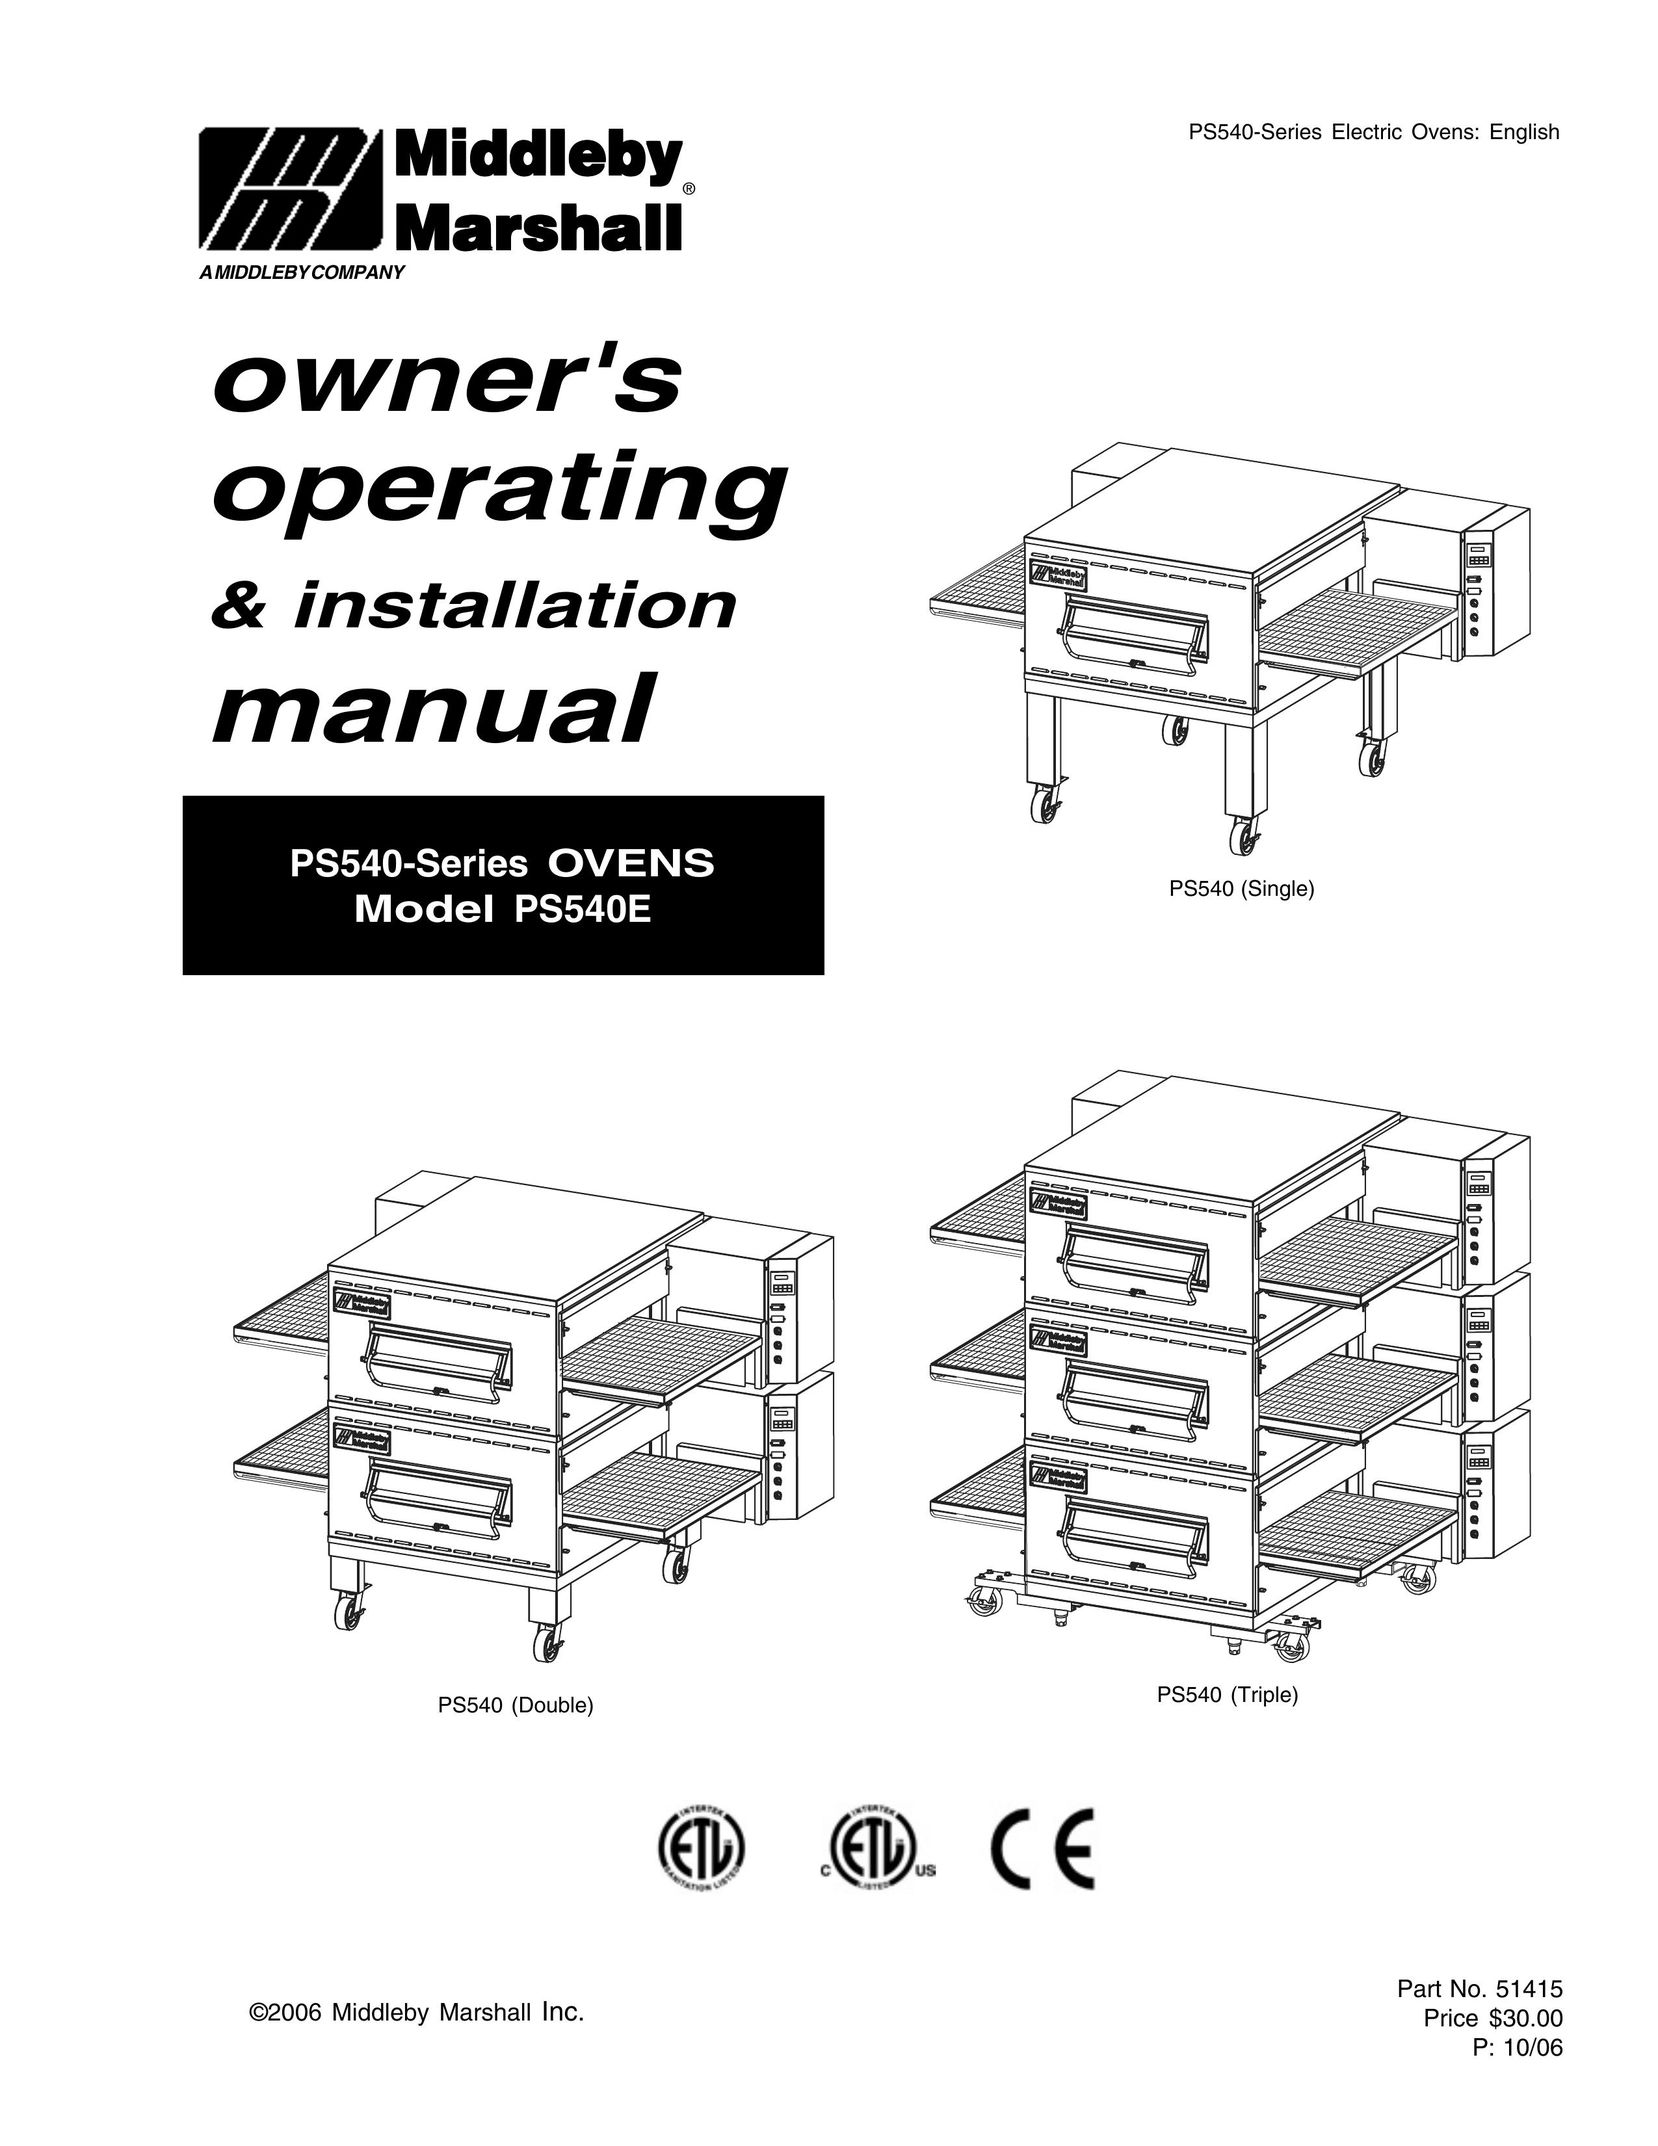 Middleby Marshall PS540E Oven User Manual